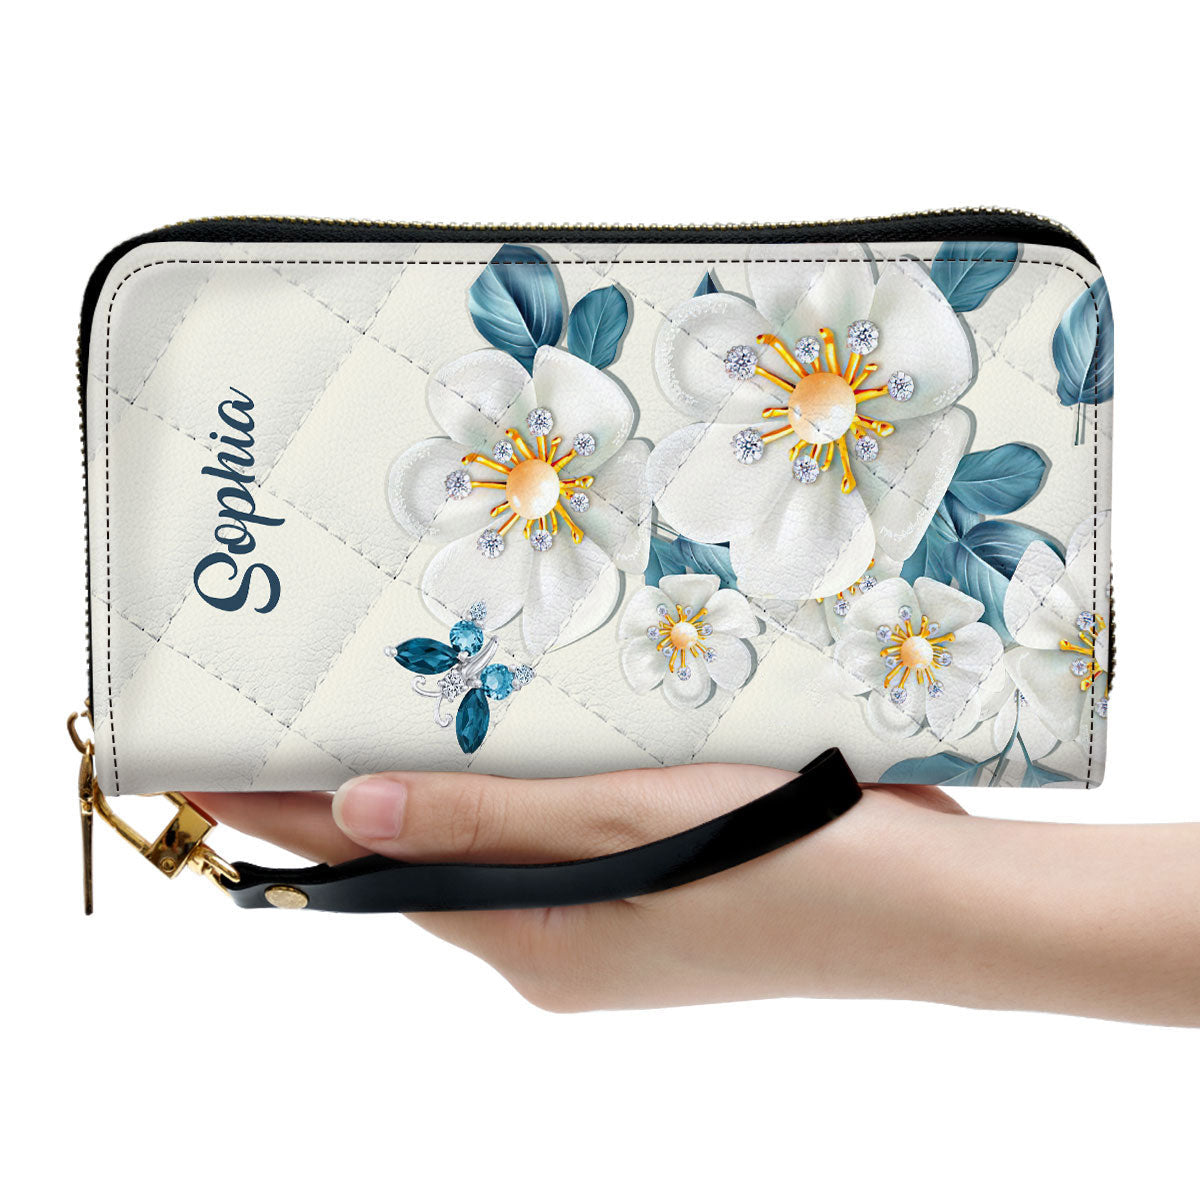 Way Maker And Miracle Worker Flower And Butterfly Clutch Purse For Women - Personalized Name - Christian Gifts For Women